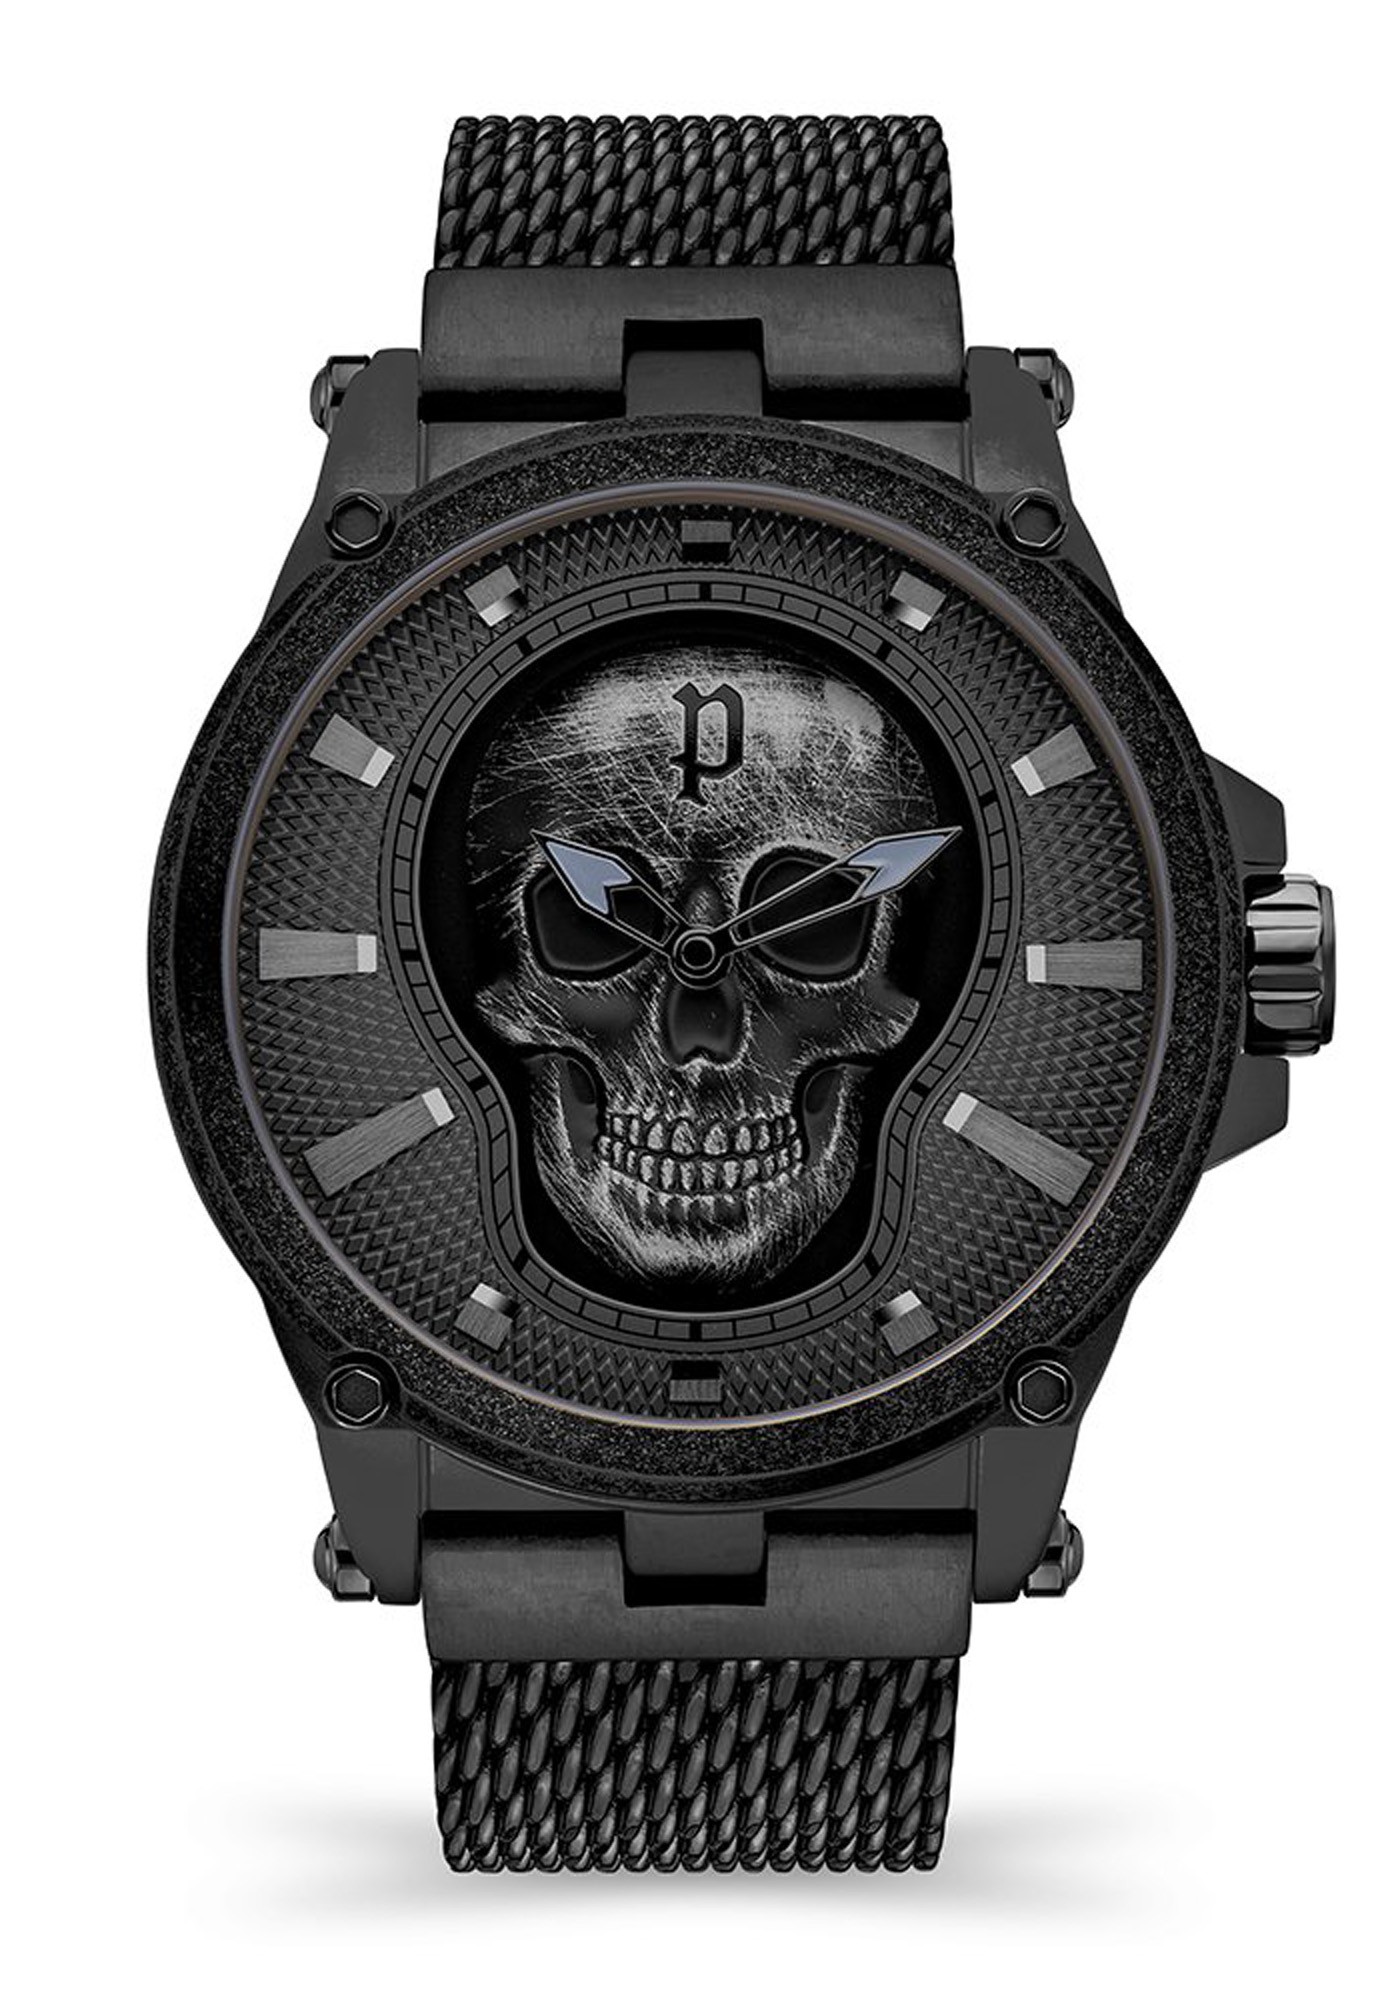 Police Men's Watch Police Watches Vertex Stainless Steel Men's Watch  Featuring Skull on Black Dial 152230 PEWJG2108502 | Comprar Watch Police  Watches Vertex Stainless Steel Men's Watch Featuring Skull on Black Dial